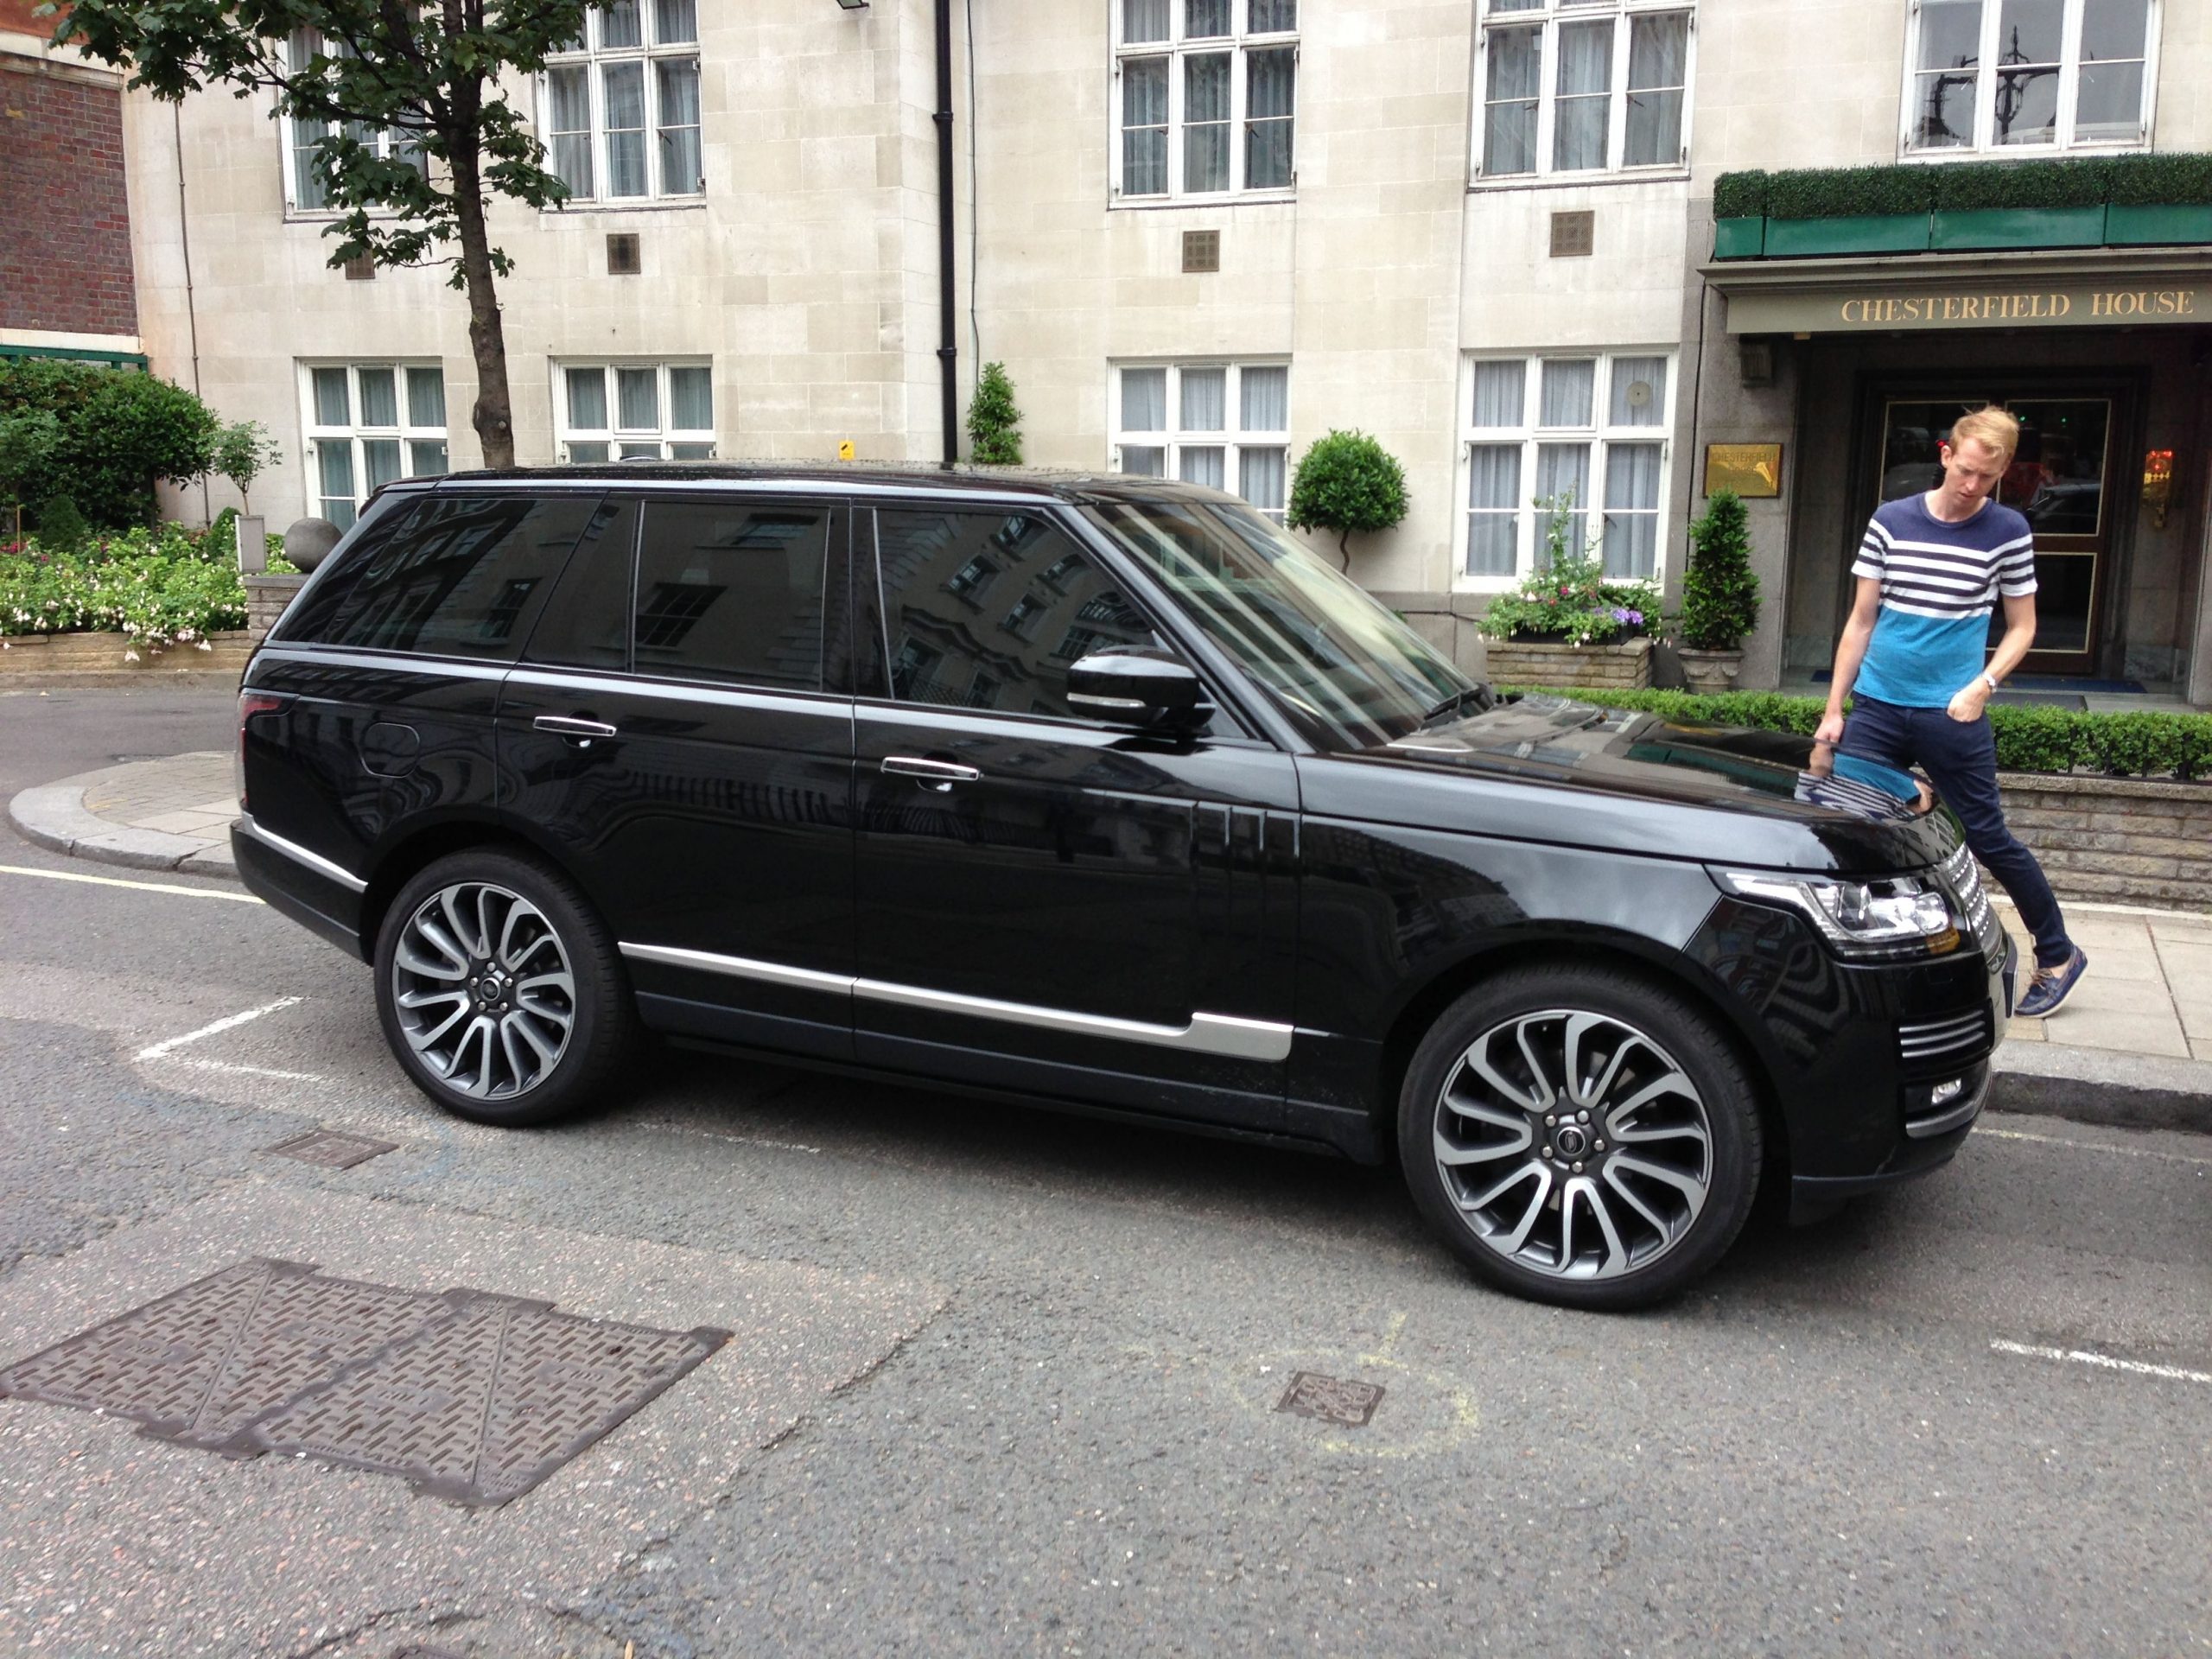 New Vogue Range Rover 2013 – YES PLEASE!